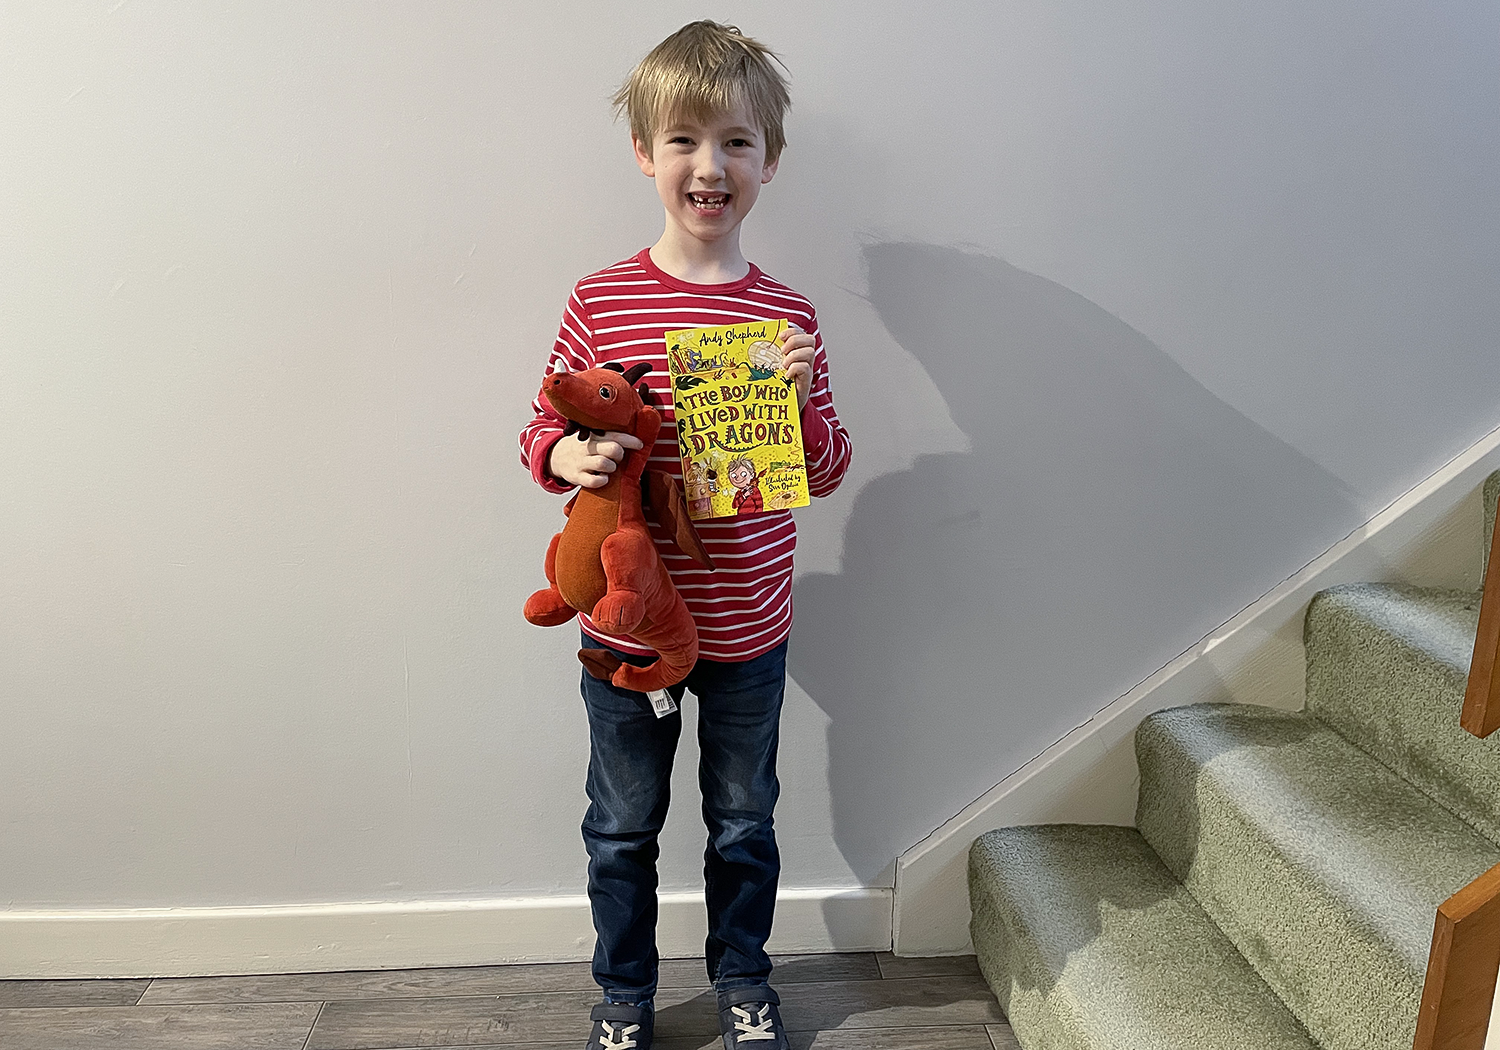 Gabe wearing a red stripy t-shirt and jeans, holding a red dragon stuffed toy and a copy of The Boy Who Lived with Dragons